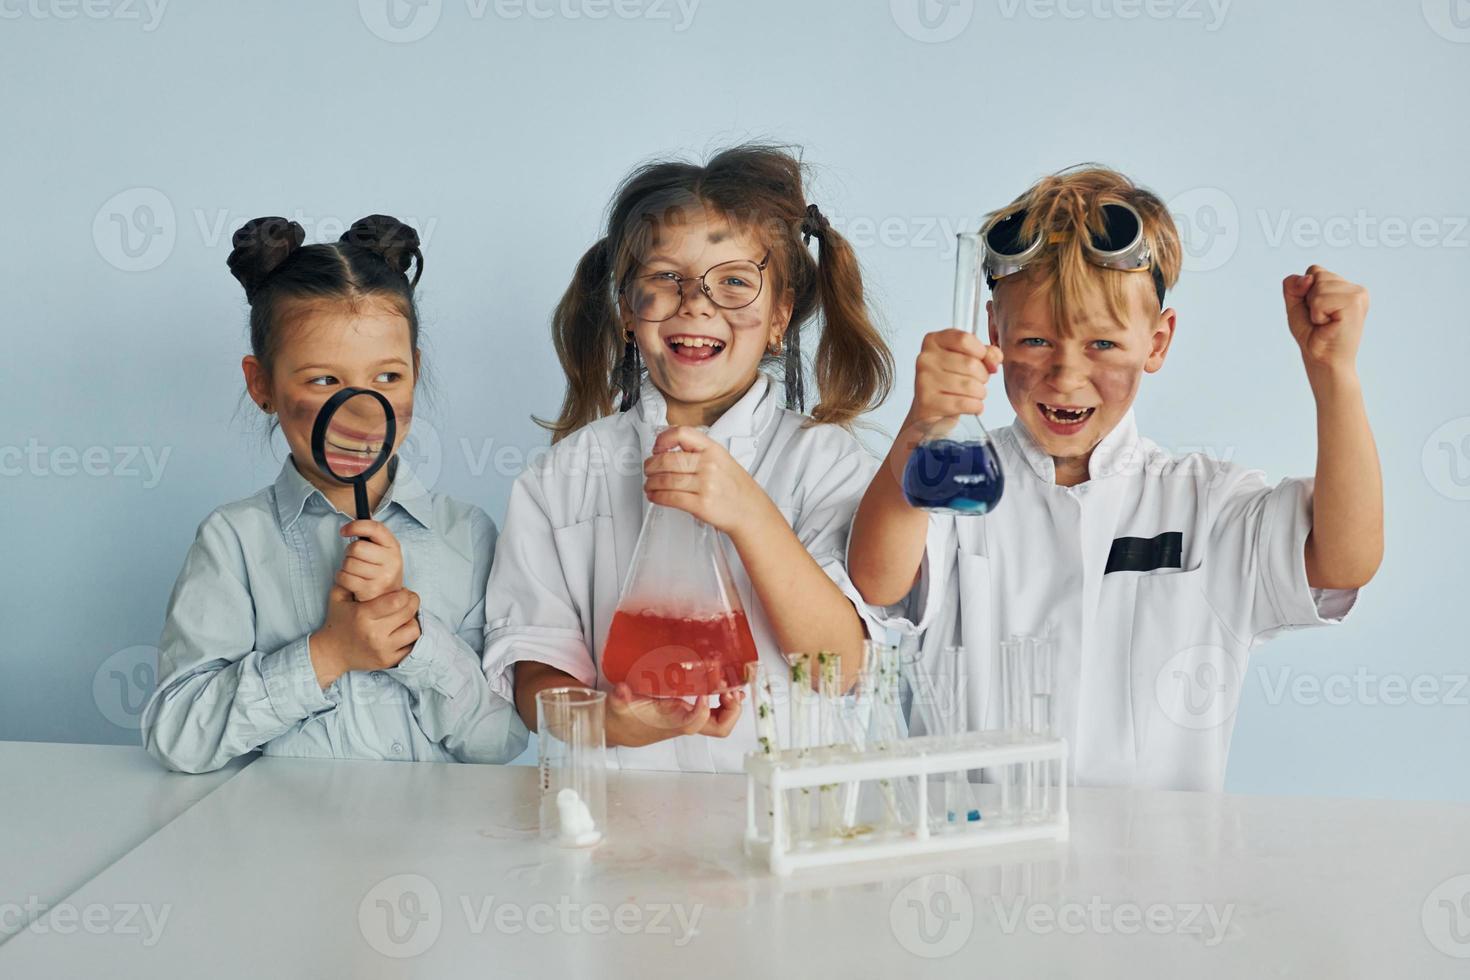 Happy friends smiling. Children in white coats plays a scientists in lab by using equipment photo